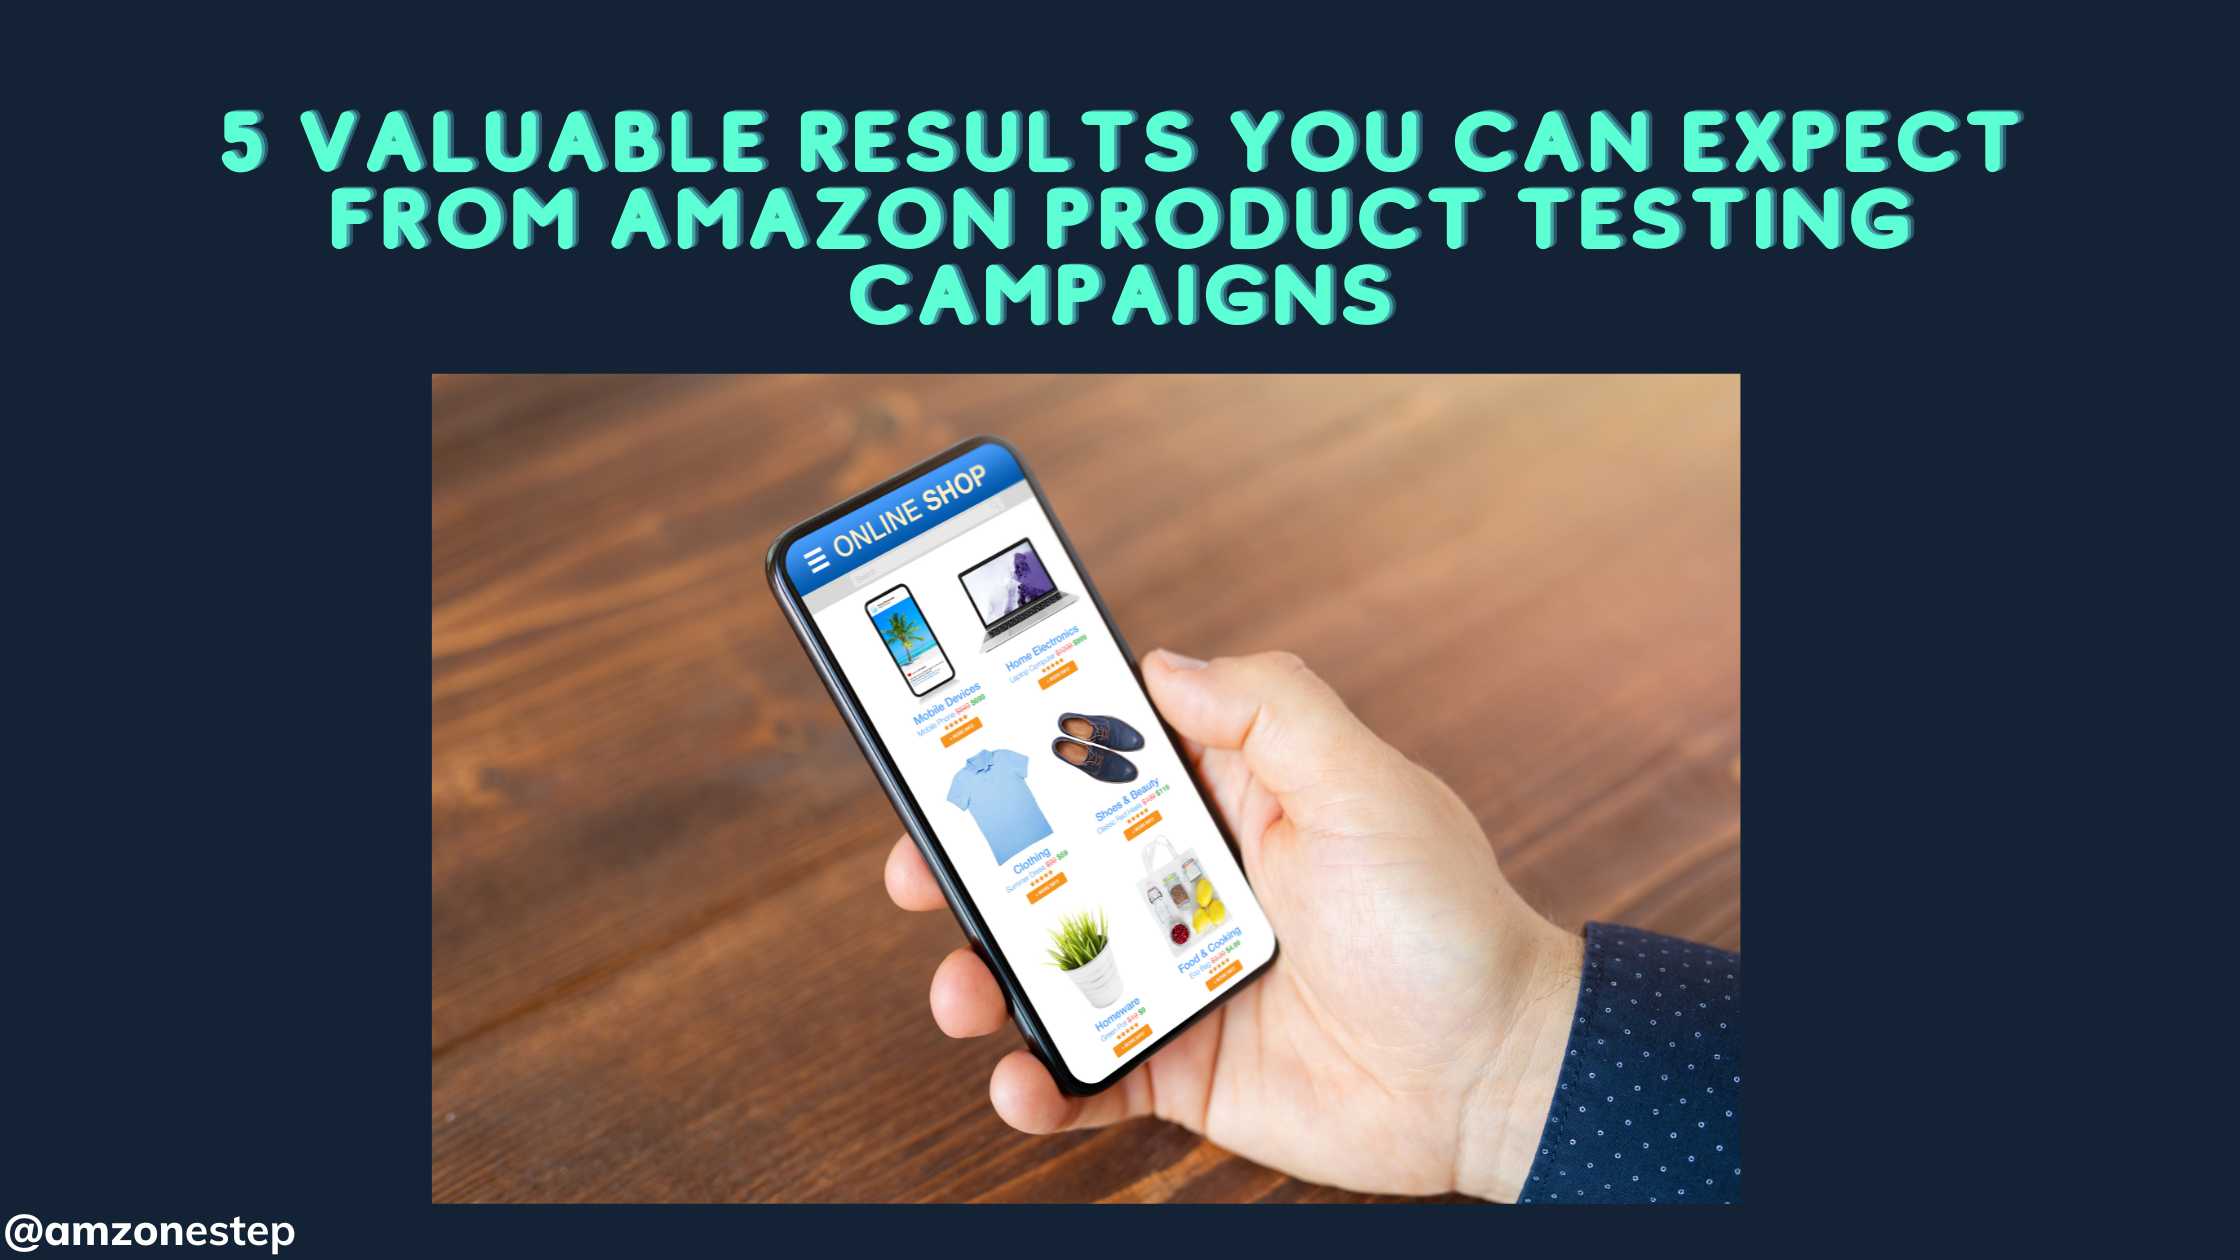 5 Valuable Results You Can Expect From Amazon Product Testing Campaigns